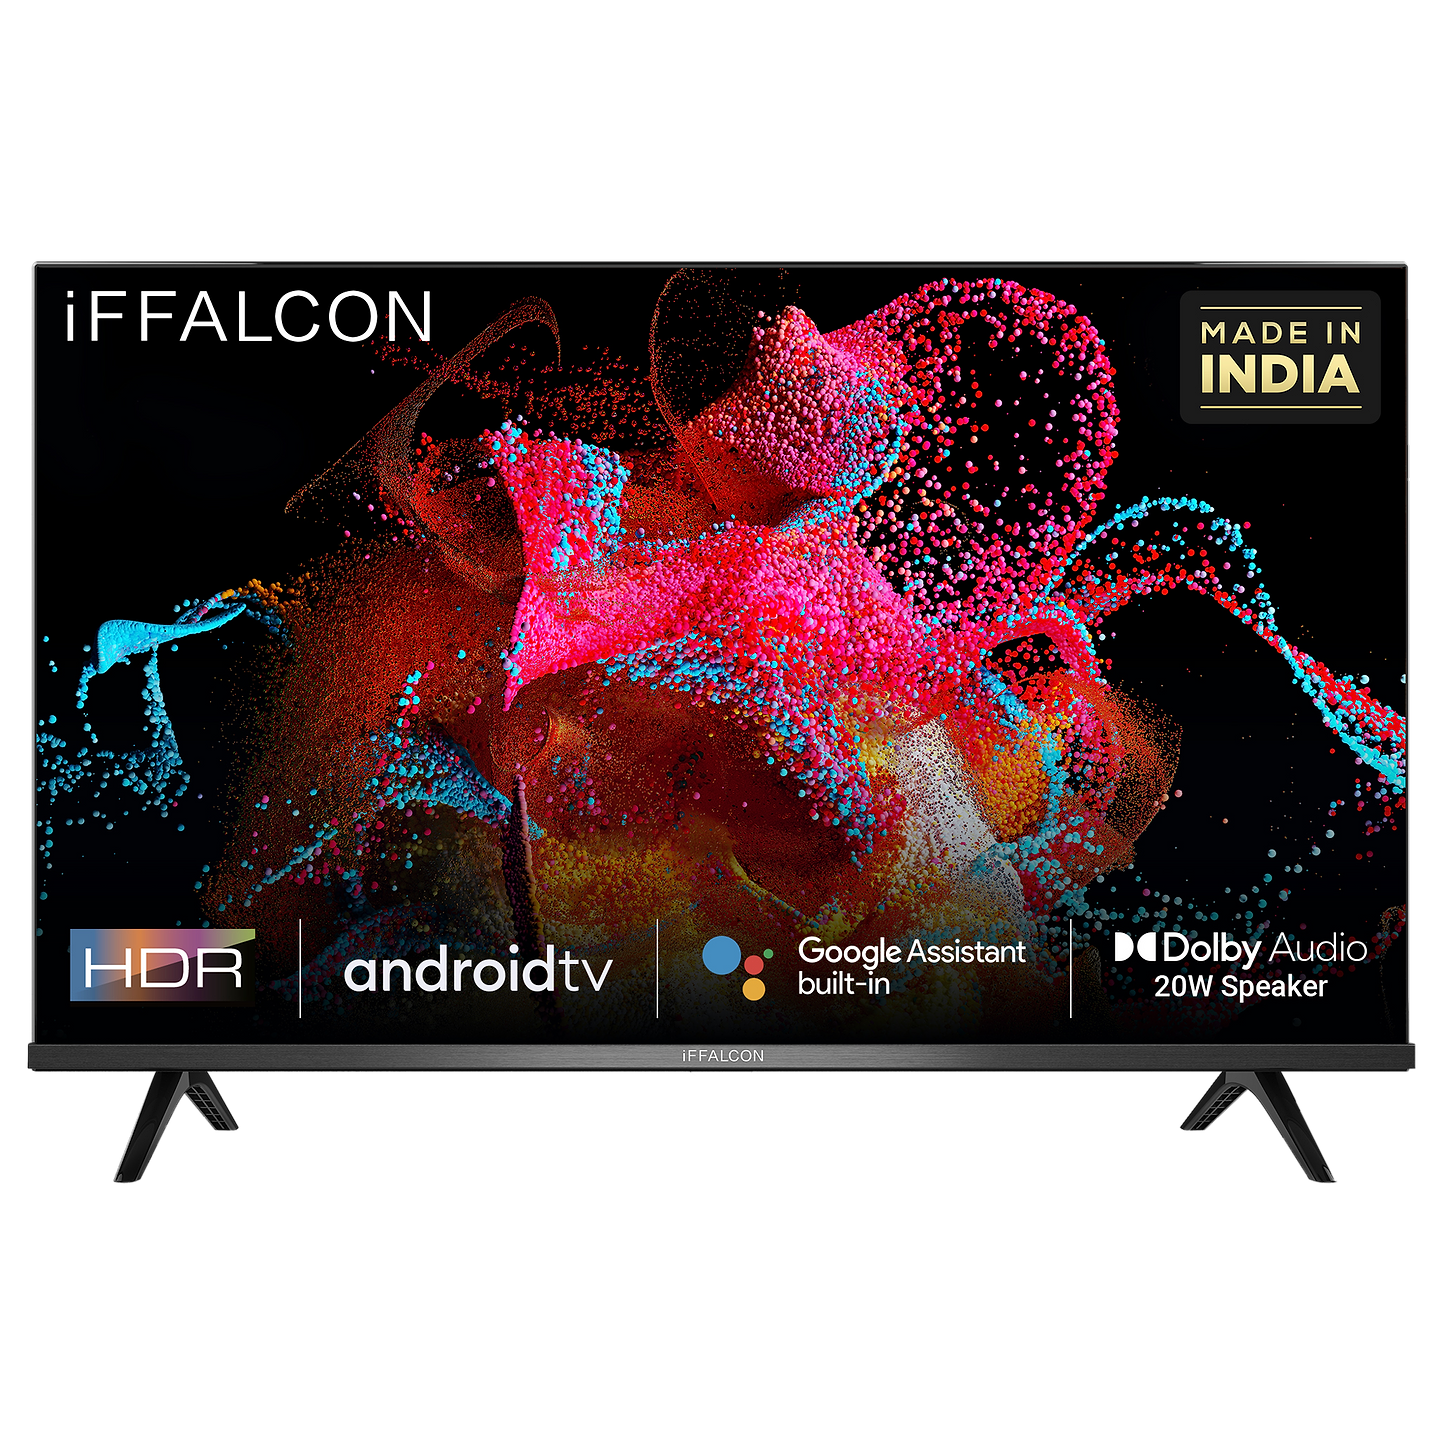 iFFALCON 79.97cm (32 Inch) HD Ready Android Smart TV (Smart HDR Picture Mode with Dolby Audio, 32F65A, Black)